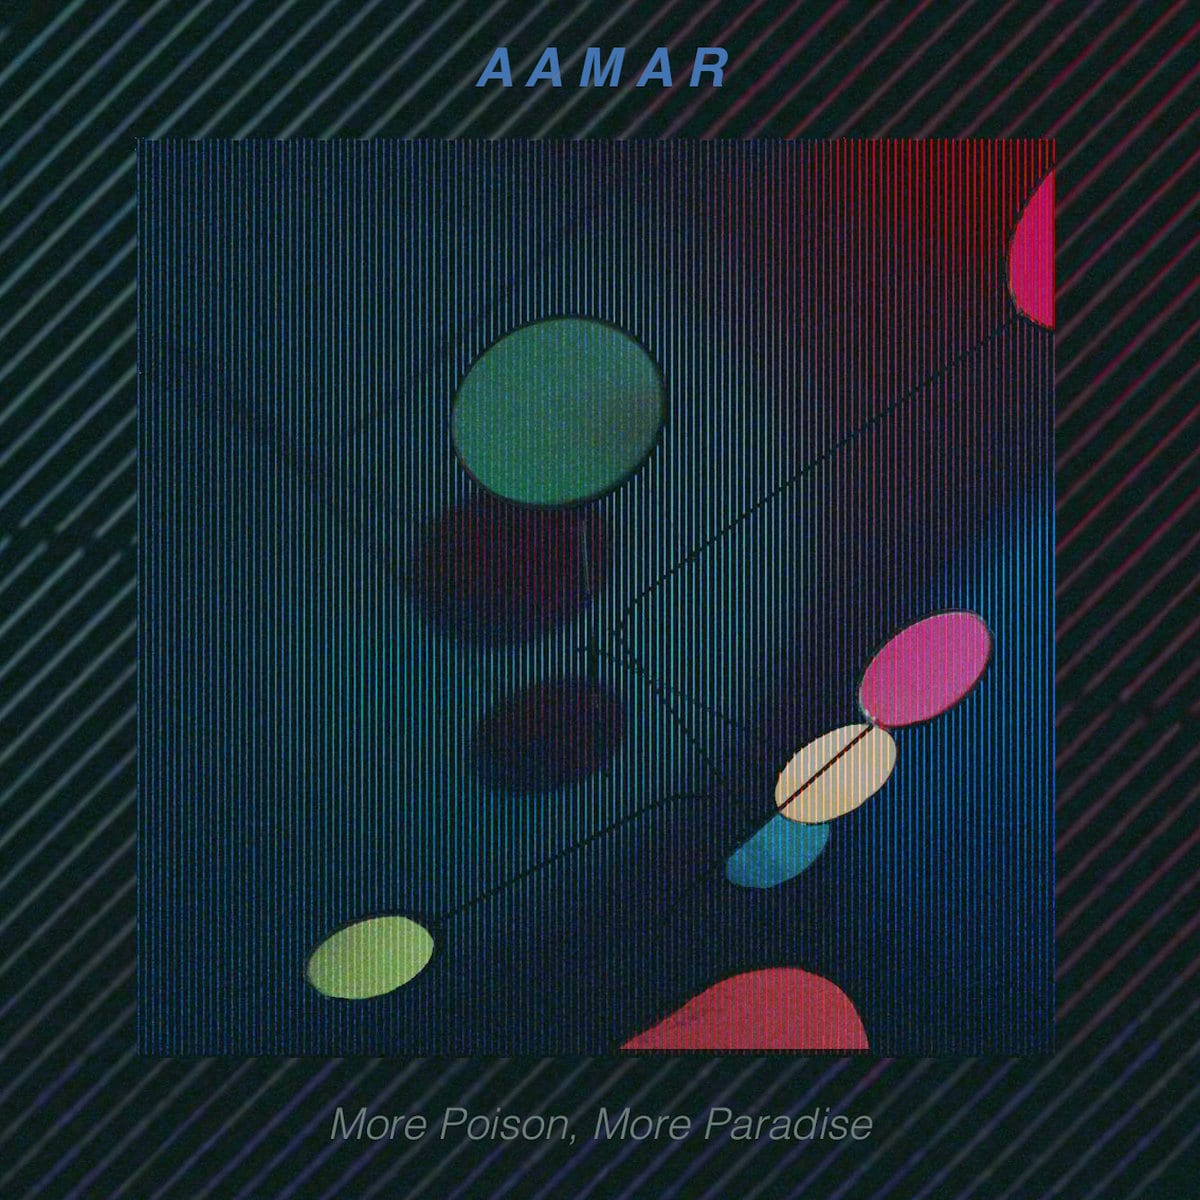 AAMAR - "More Poison, More Paradise" (Release)